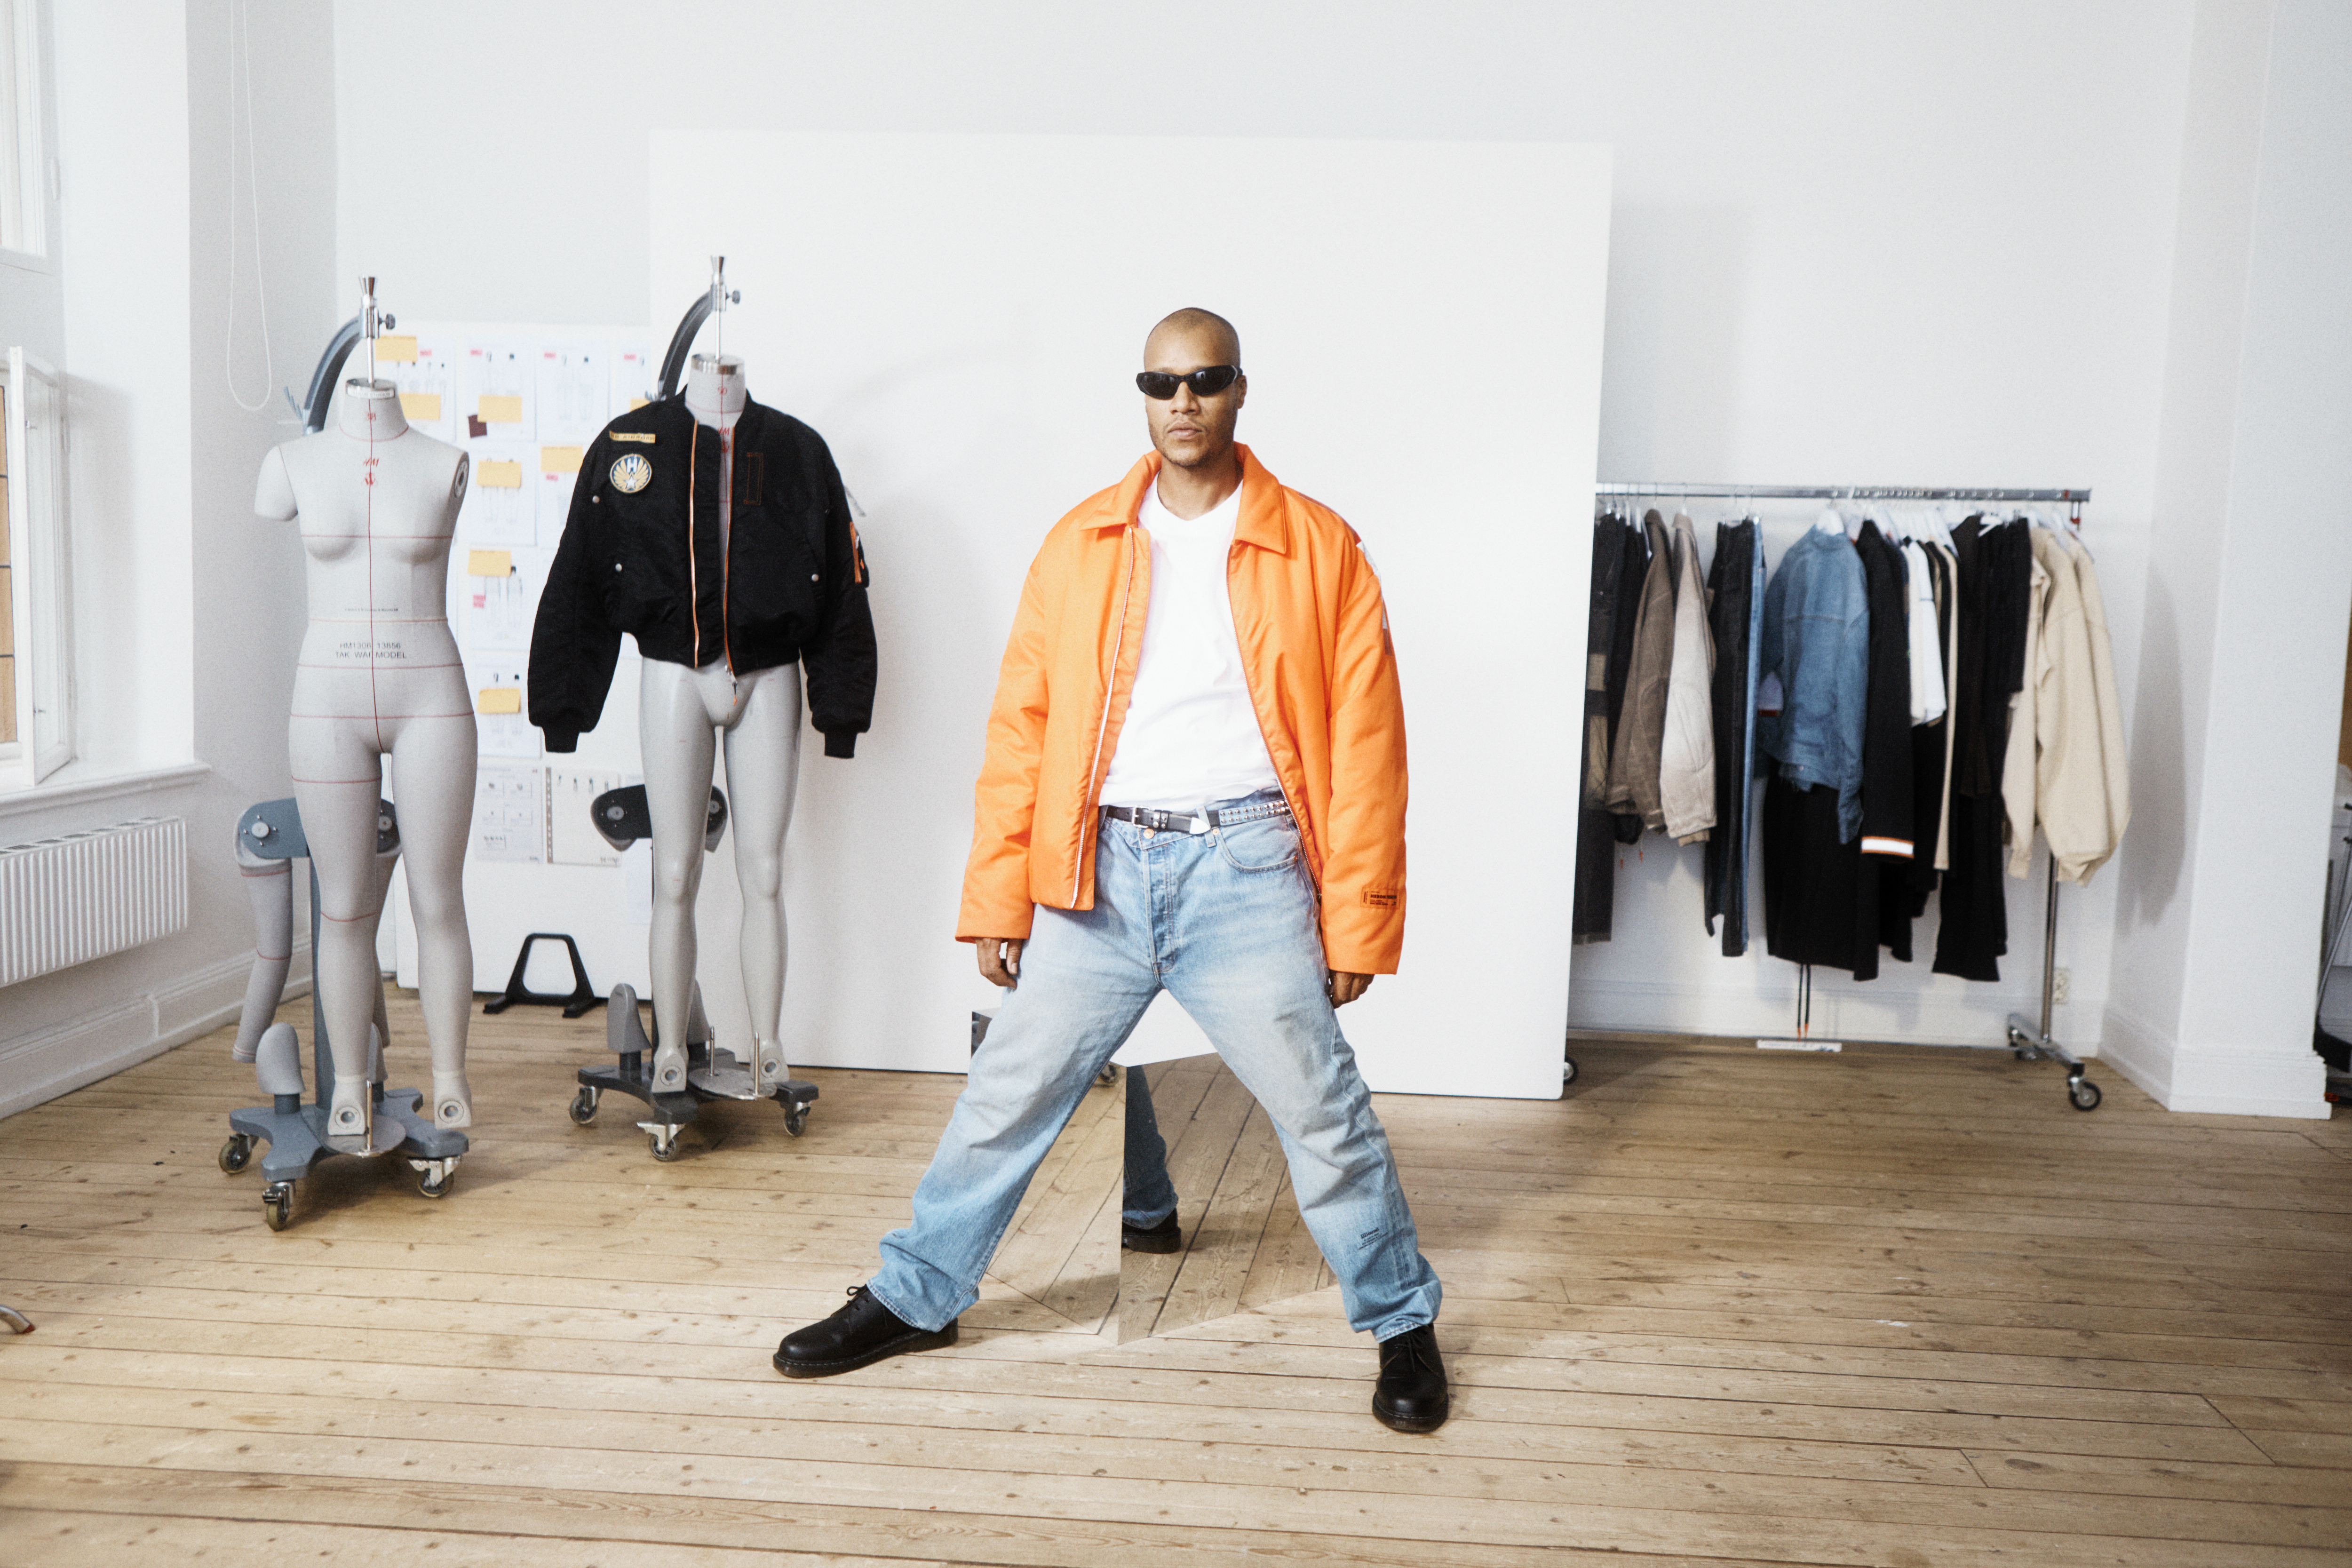 Heron Preston & H&M's menswear directors reveal the H2 collaboration, sitting in a room with mannequins and clothes on racks